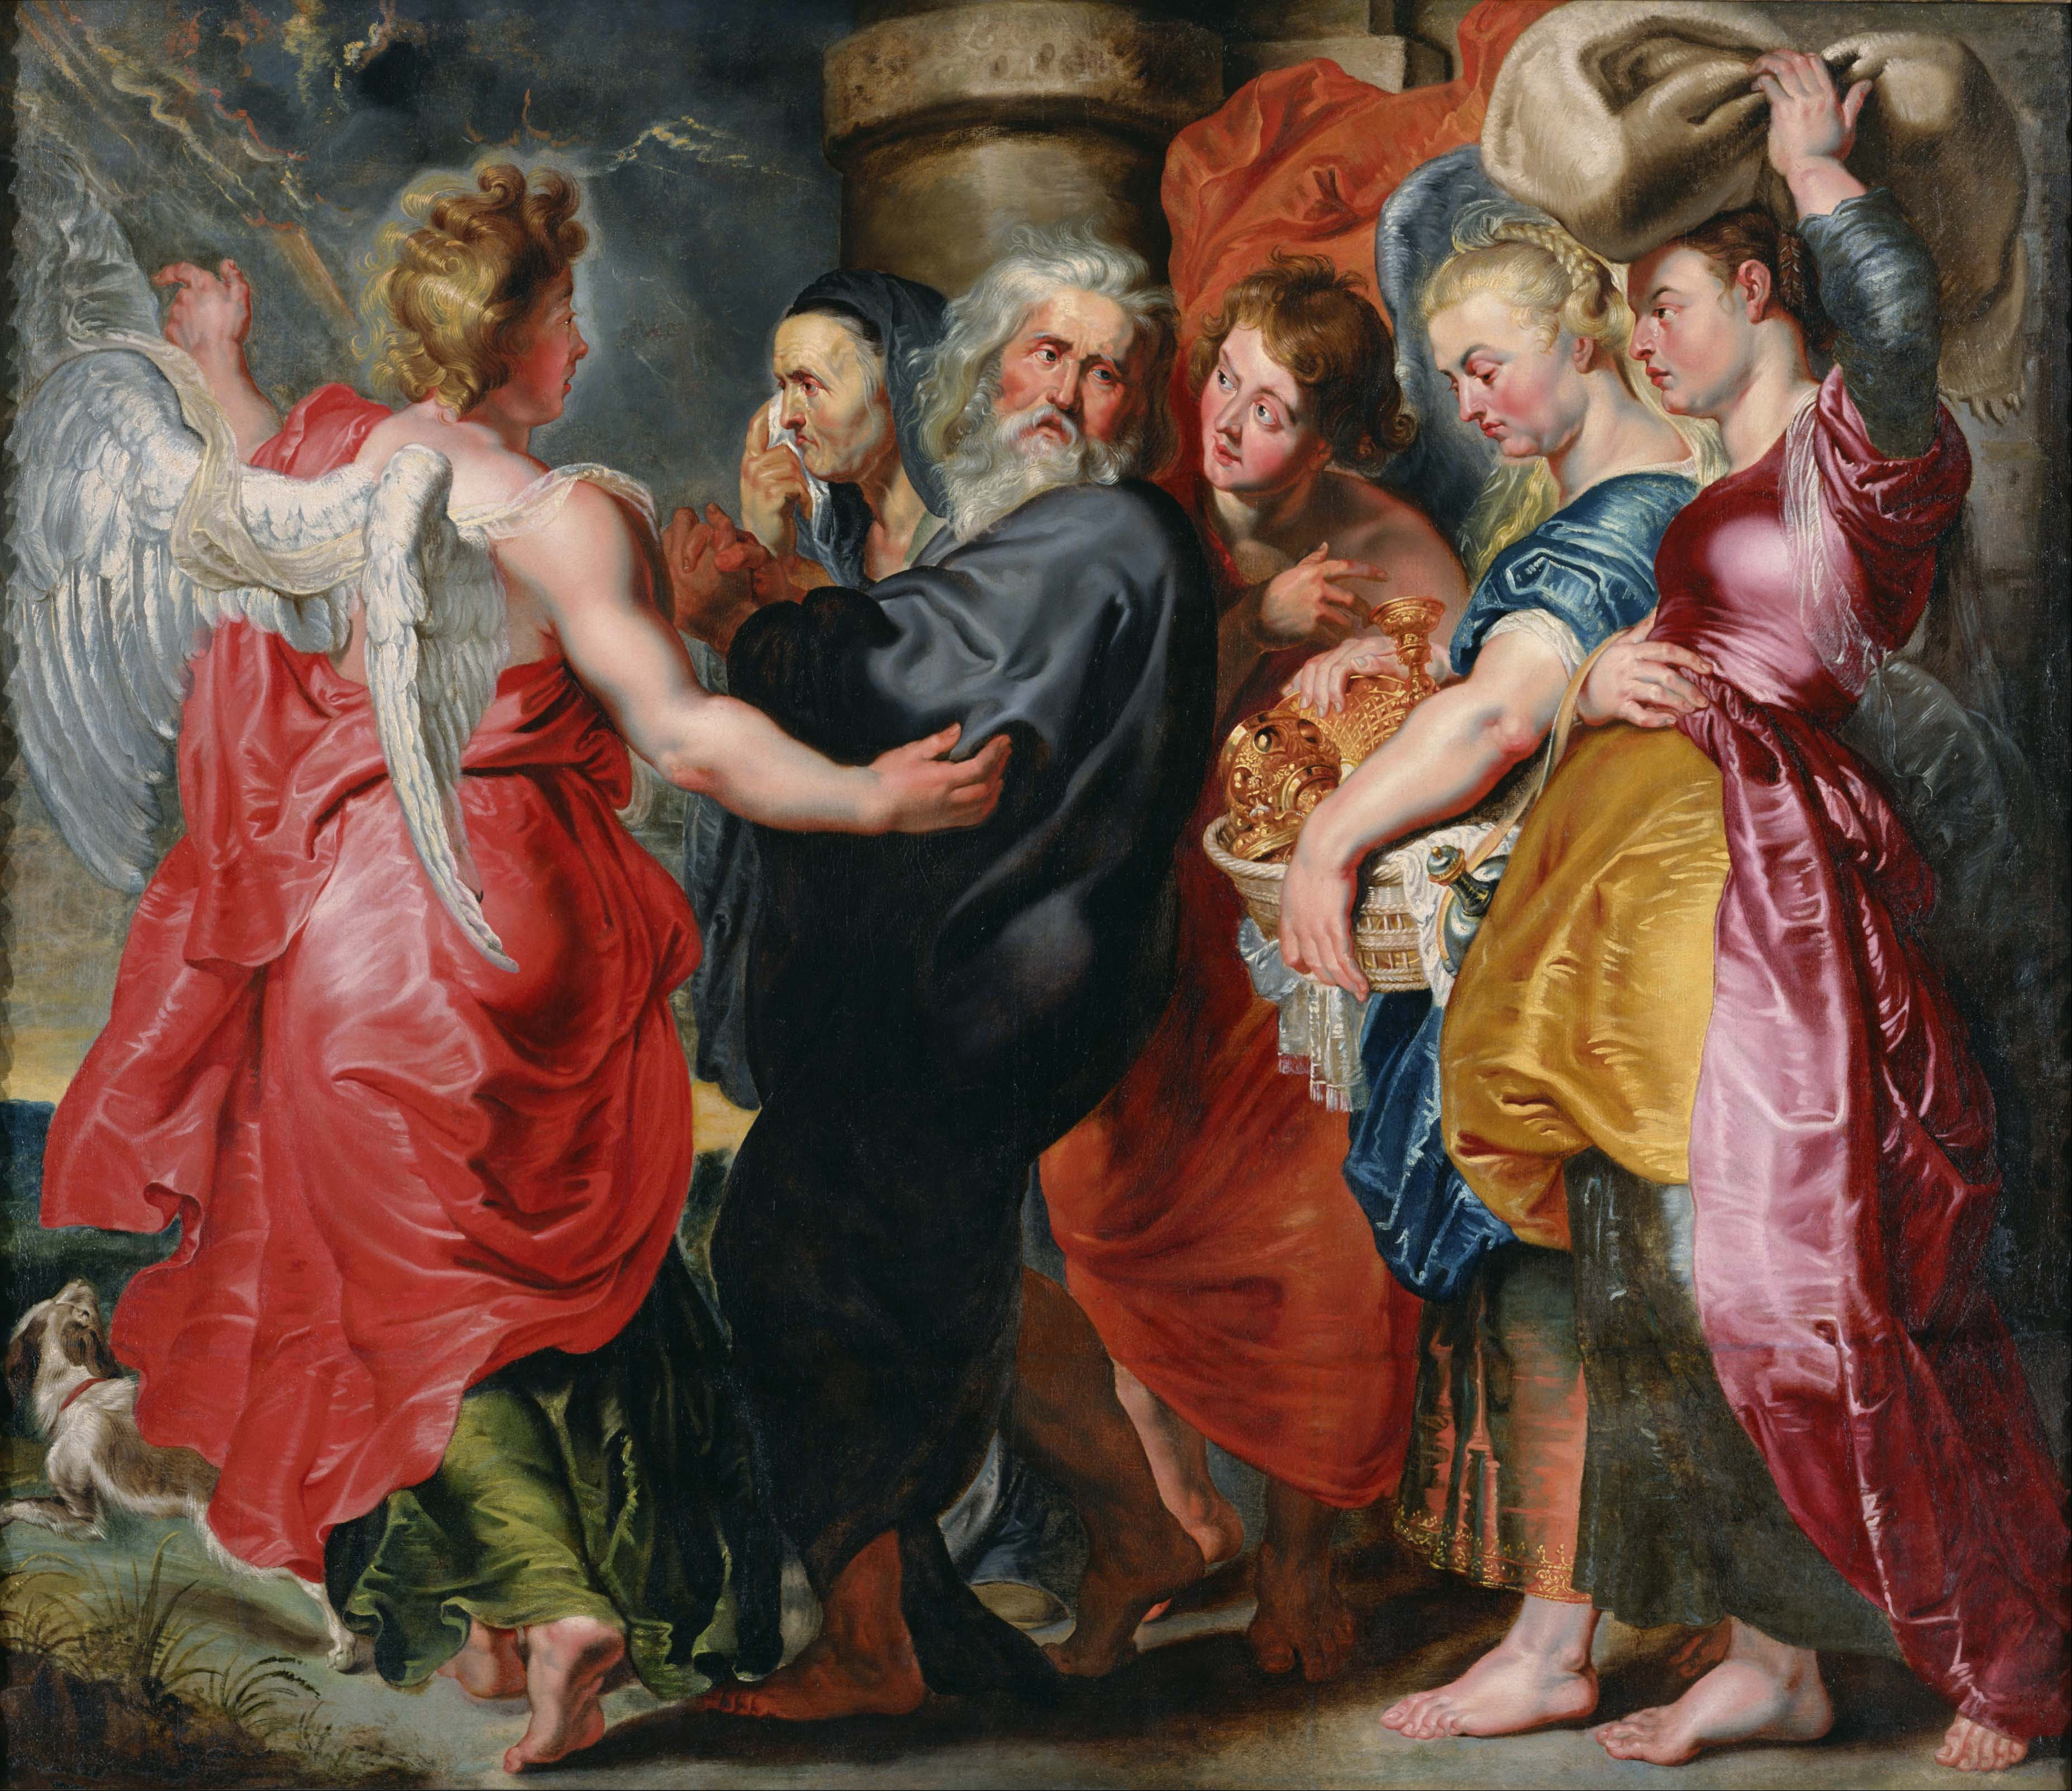 Jacob Jordaens - The Flight of Lot and His Family from Sodom (after Rubens) - Google Art Project